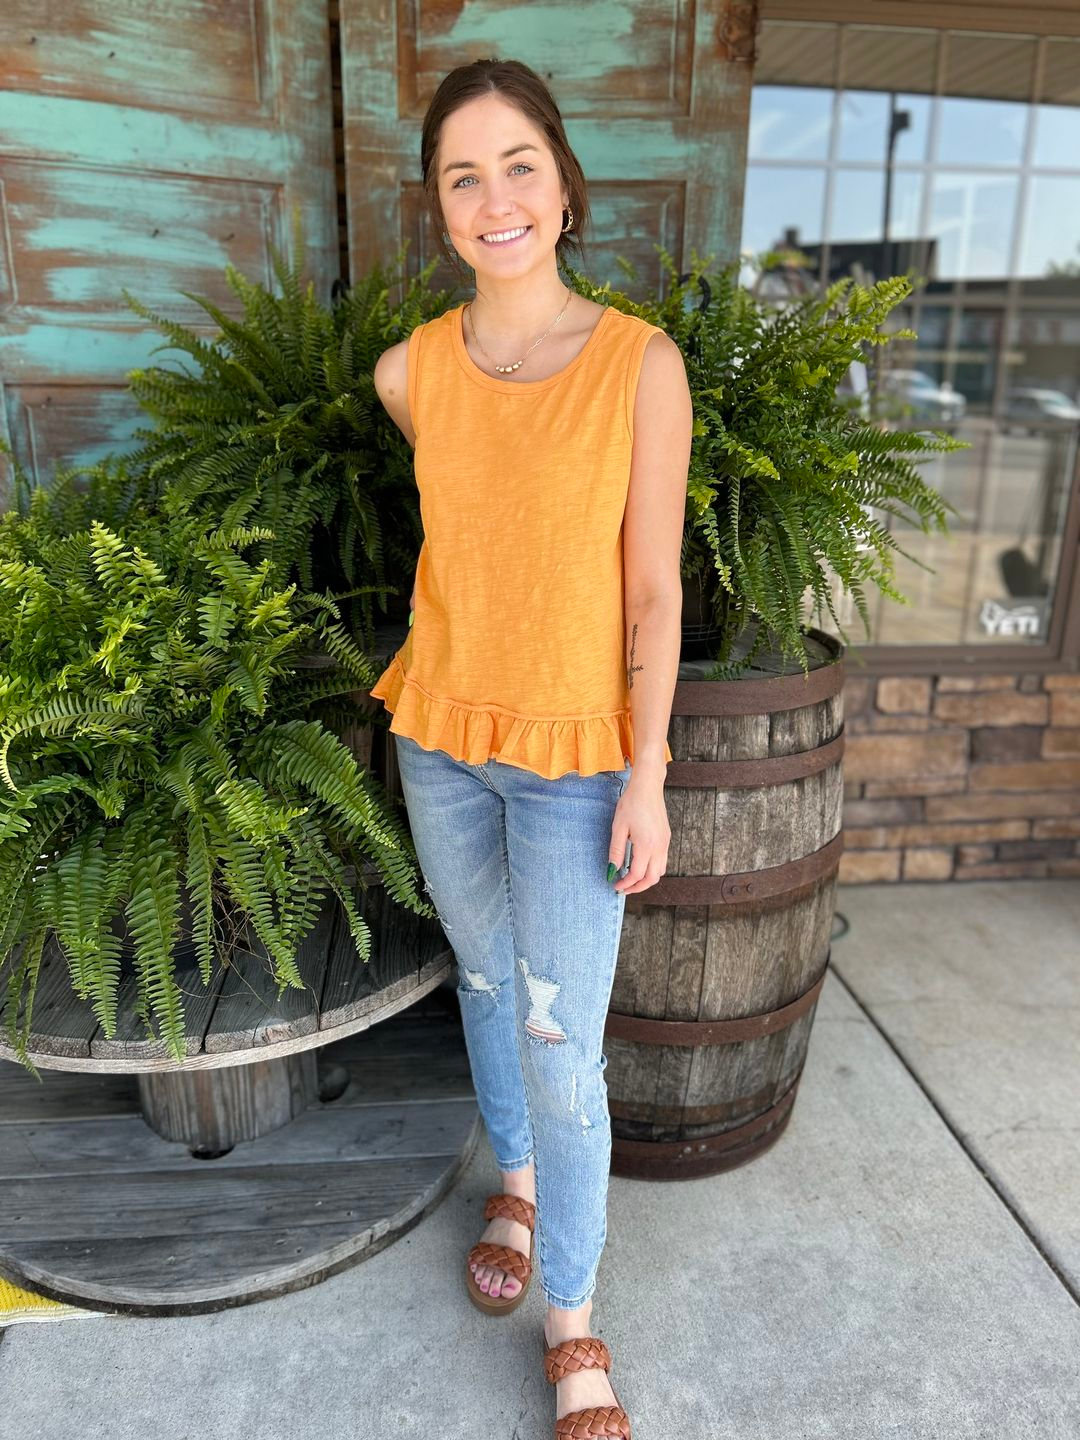 Shop Women's Tops at Evergreen Boutique | Online and In Store  Women’s Fashion Boutique Located in Santa Claus, Indiana. 